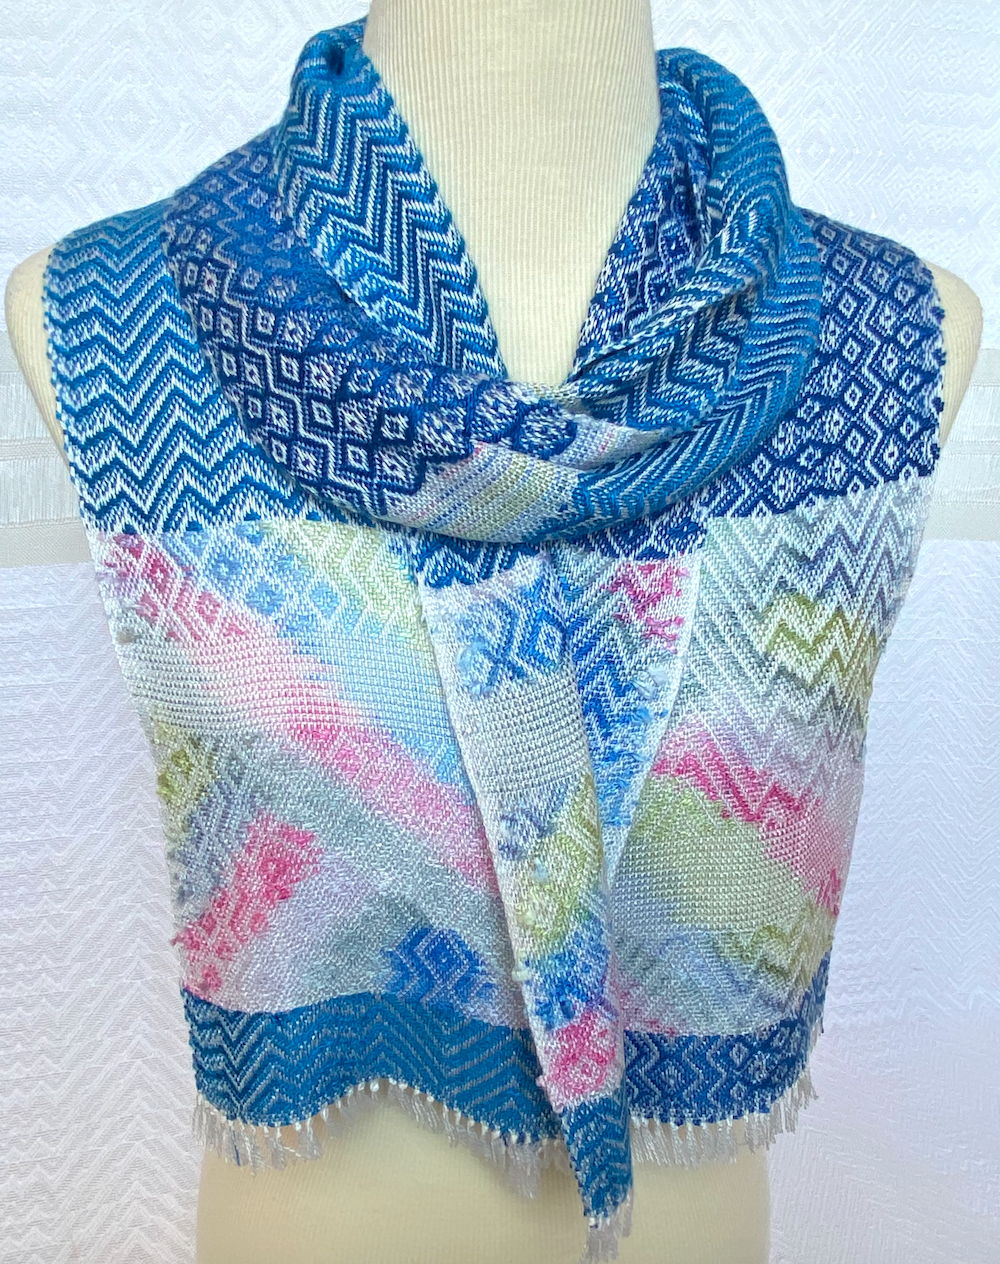  Spring Inlay with Blues Handwoven Scarf     